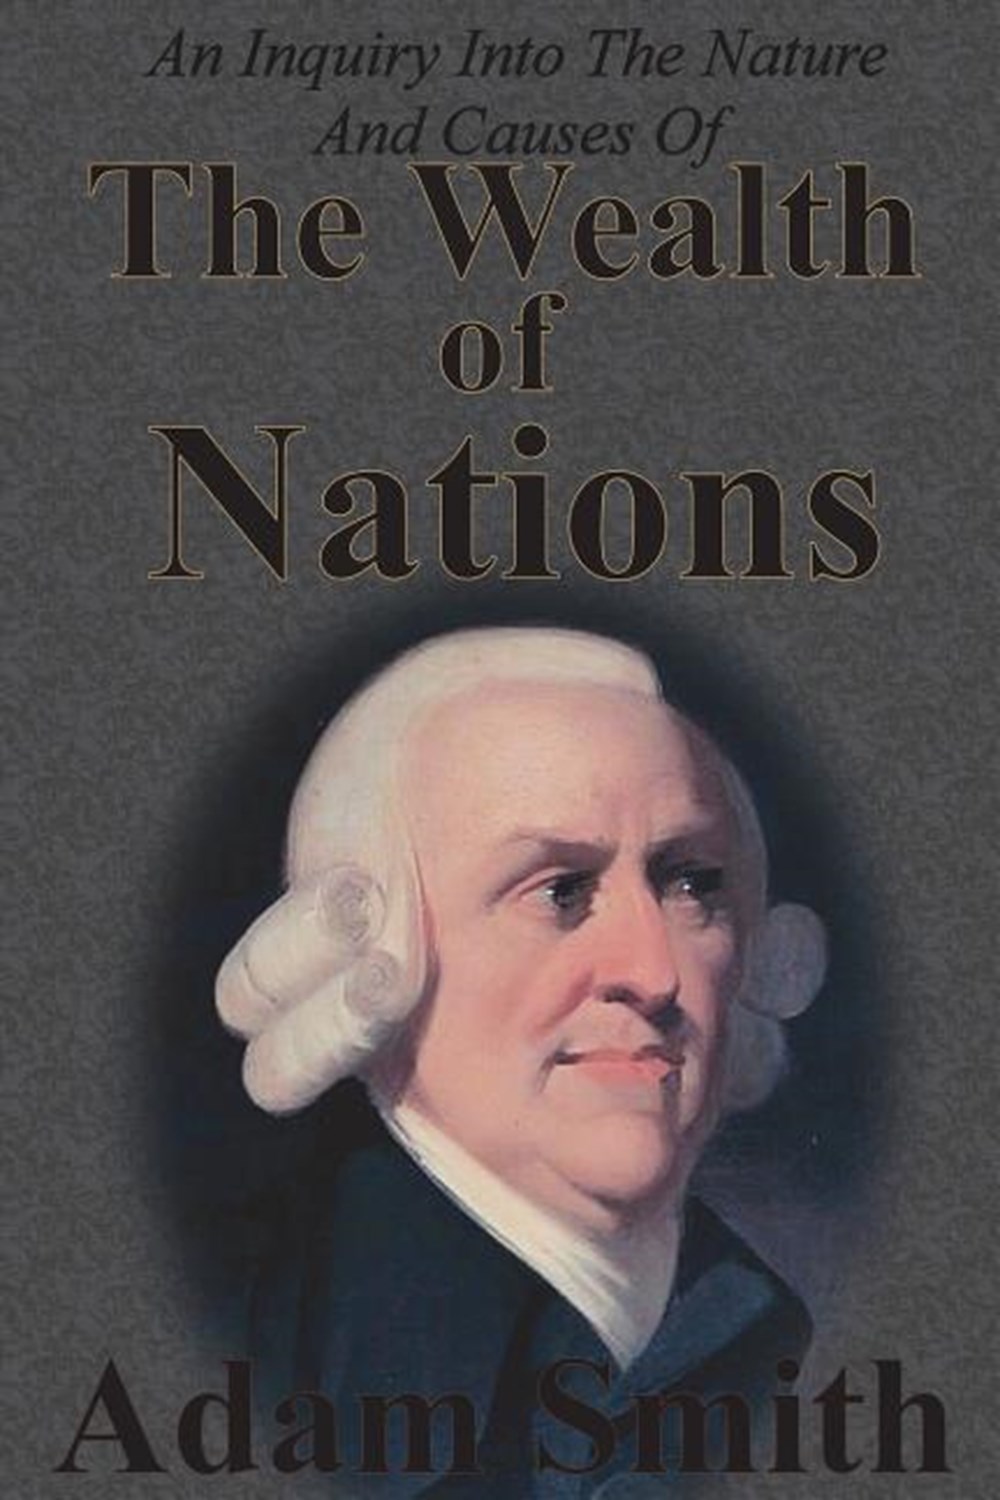 Inquiry Into The Nature And Causes Of The Wealth Of Nations